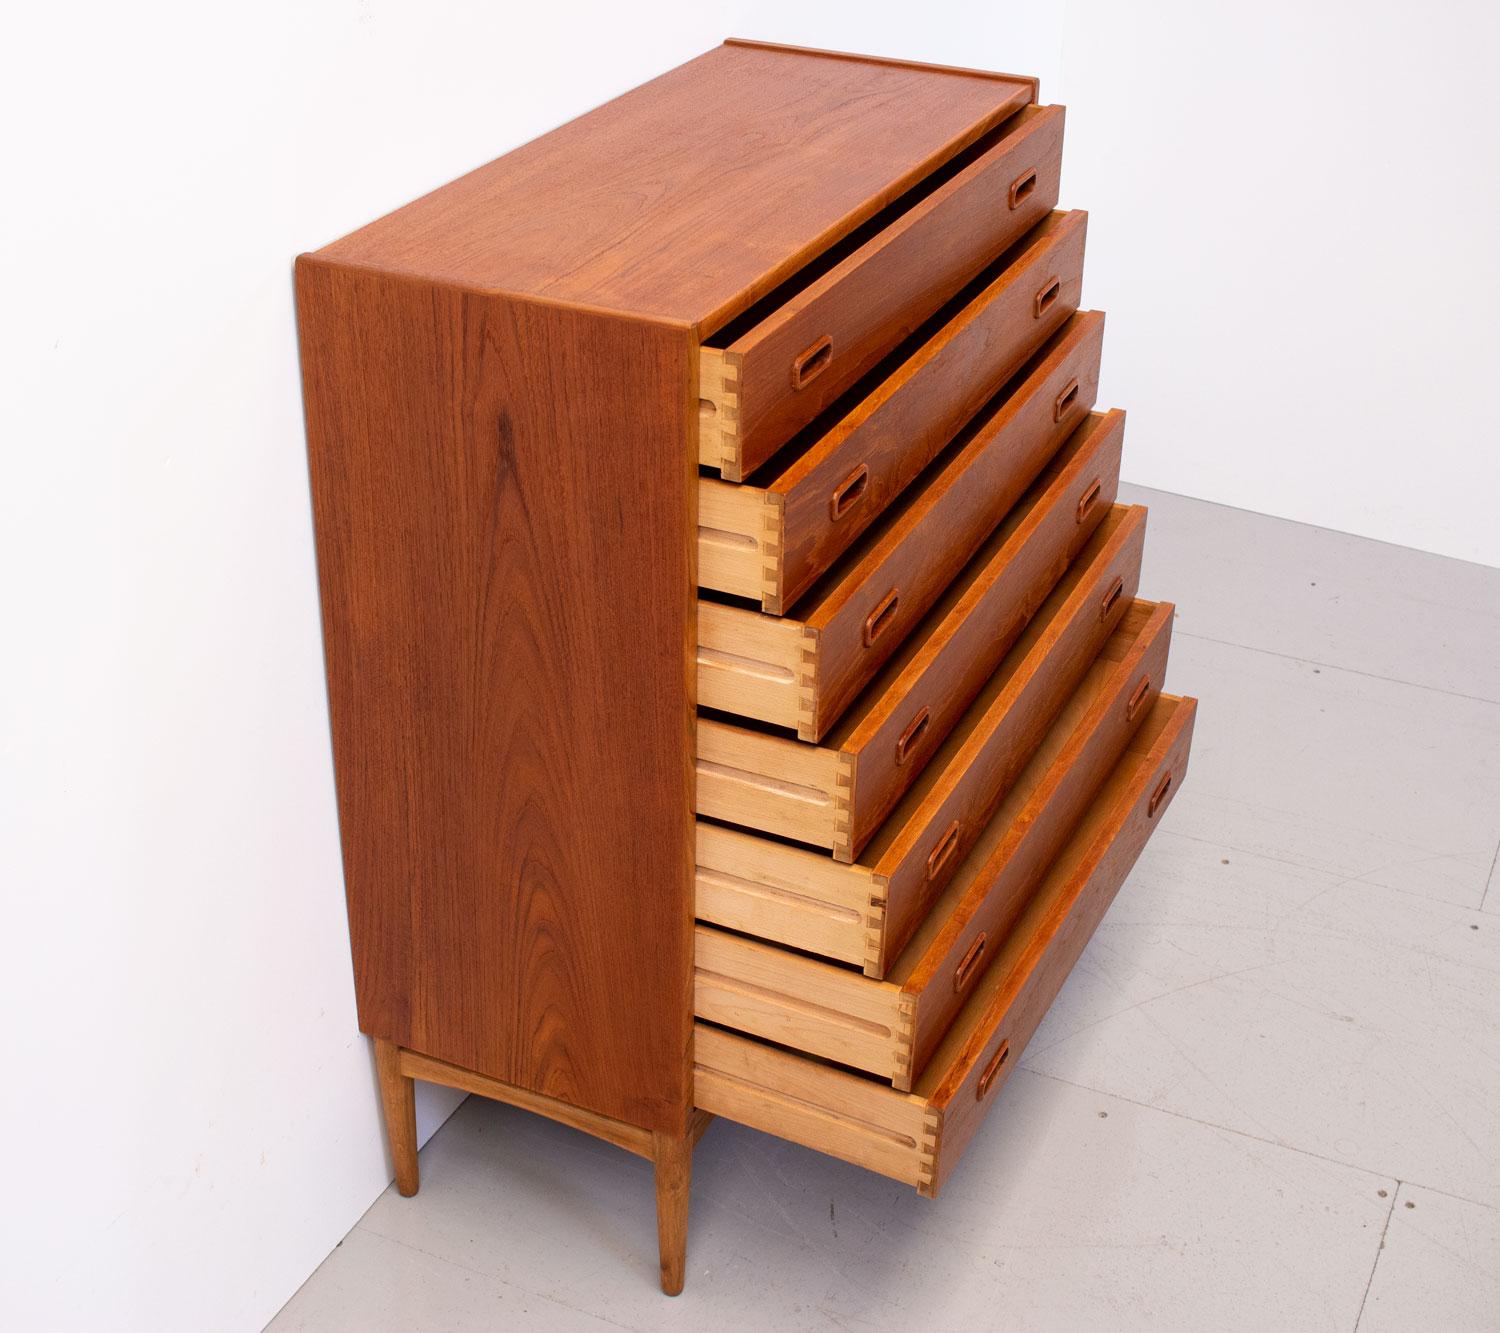 Stylish and minimalist Danish teak chest of drawers designed by Arne Hovmand-Olsen for Mogens Kold in the 1950s. It has 7 wide drawers with carved recessed handles and oak legs.